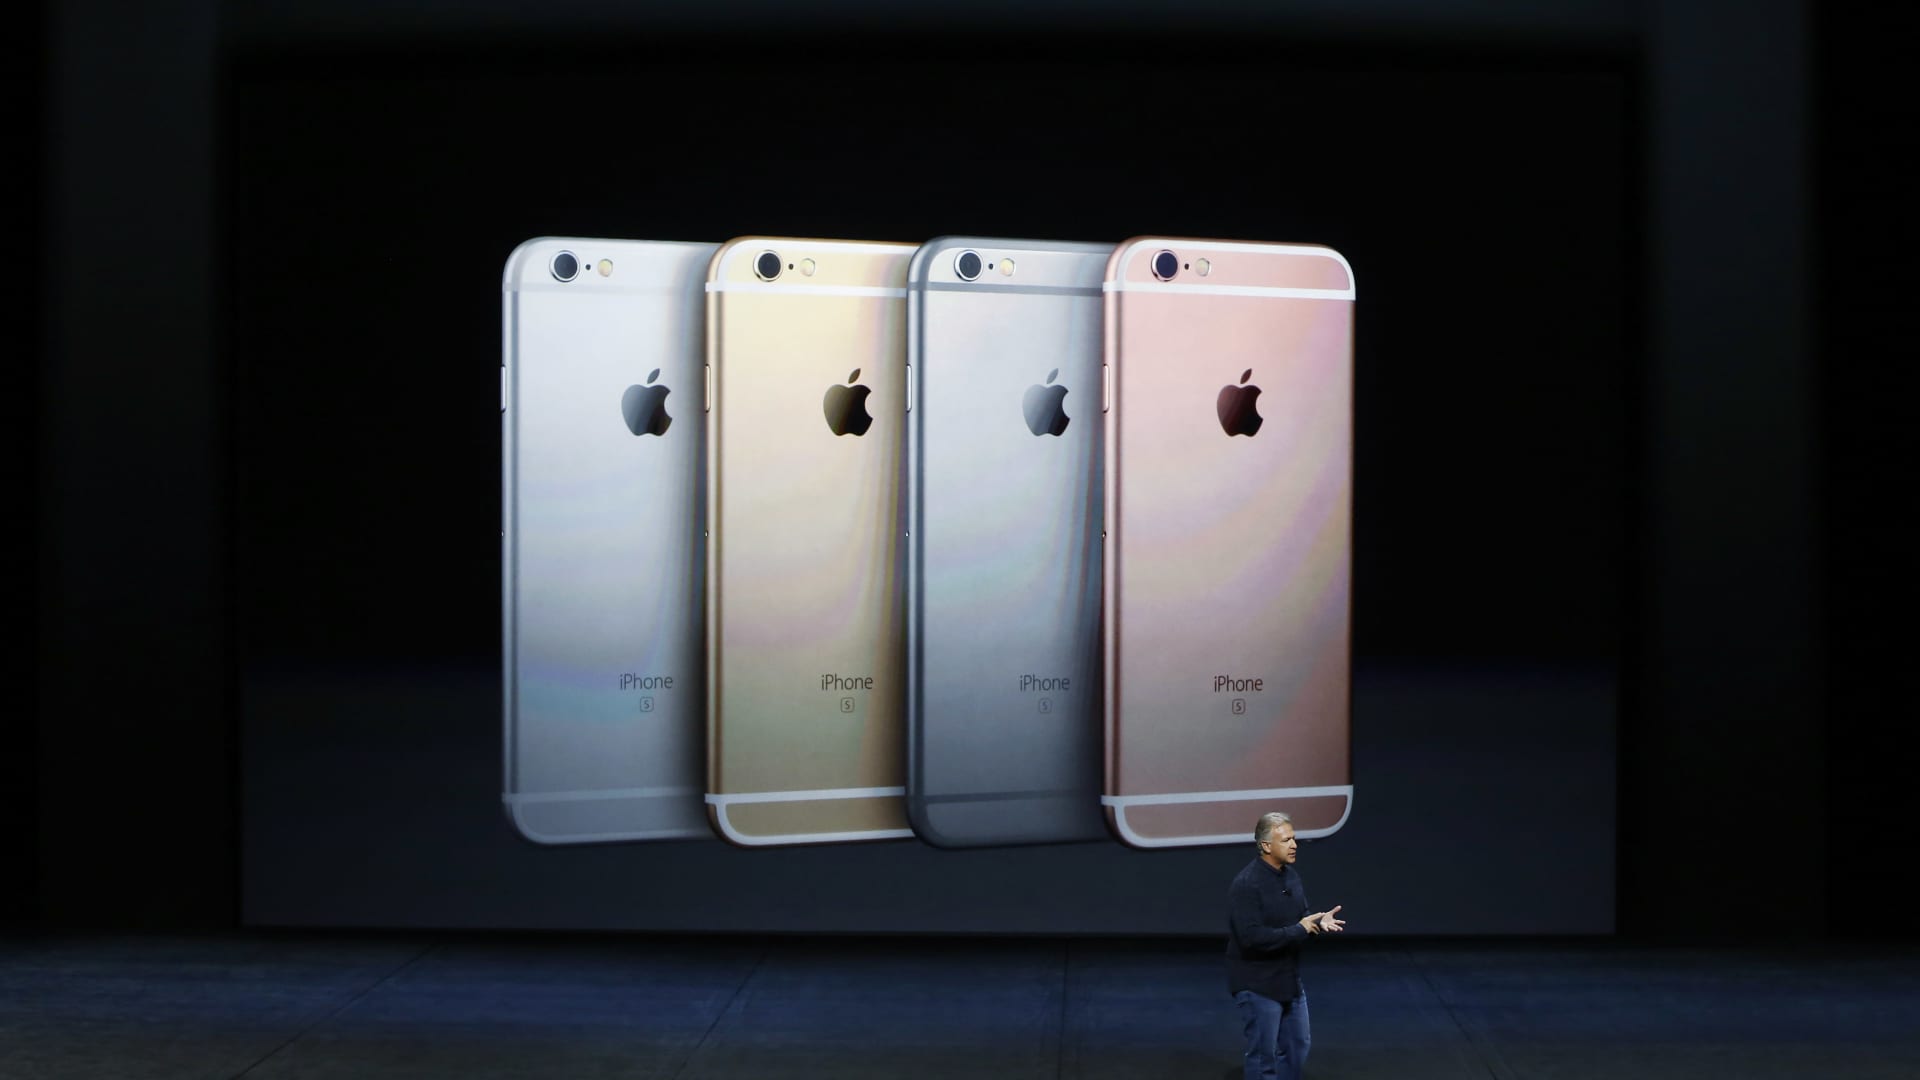 Apple Senior Vice President of Worldwide Marketing Phil Schiller speaks on the new iPhone 6s and 6s Plus during a Special Event at Bill Graham Civic Auditorium September 9, 2015 in San Francisco, California.